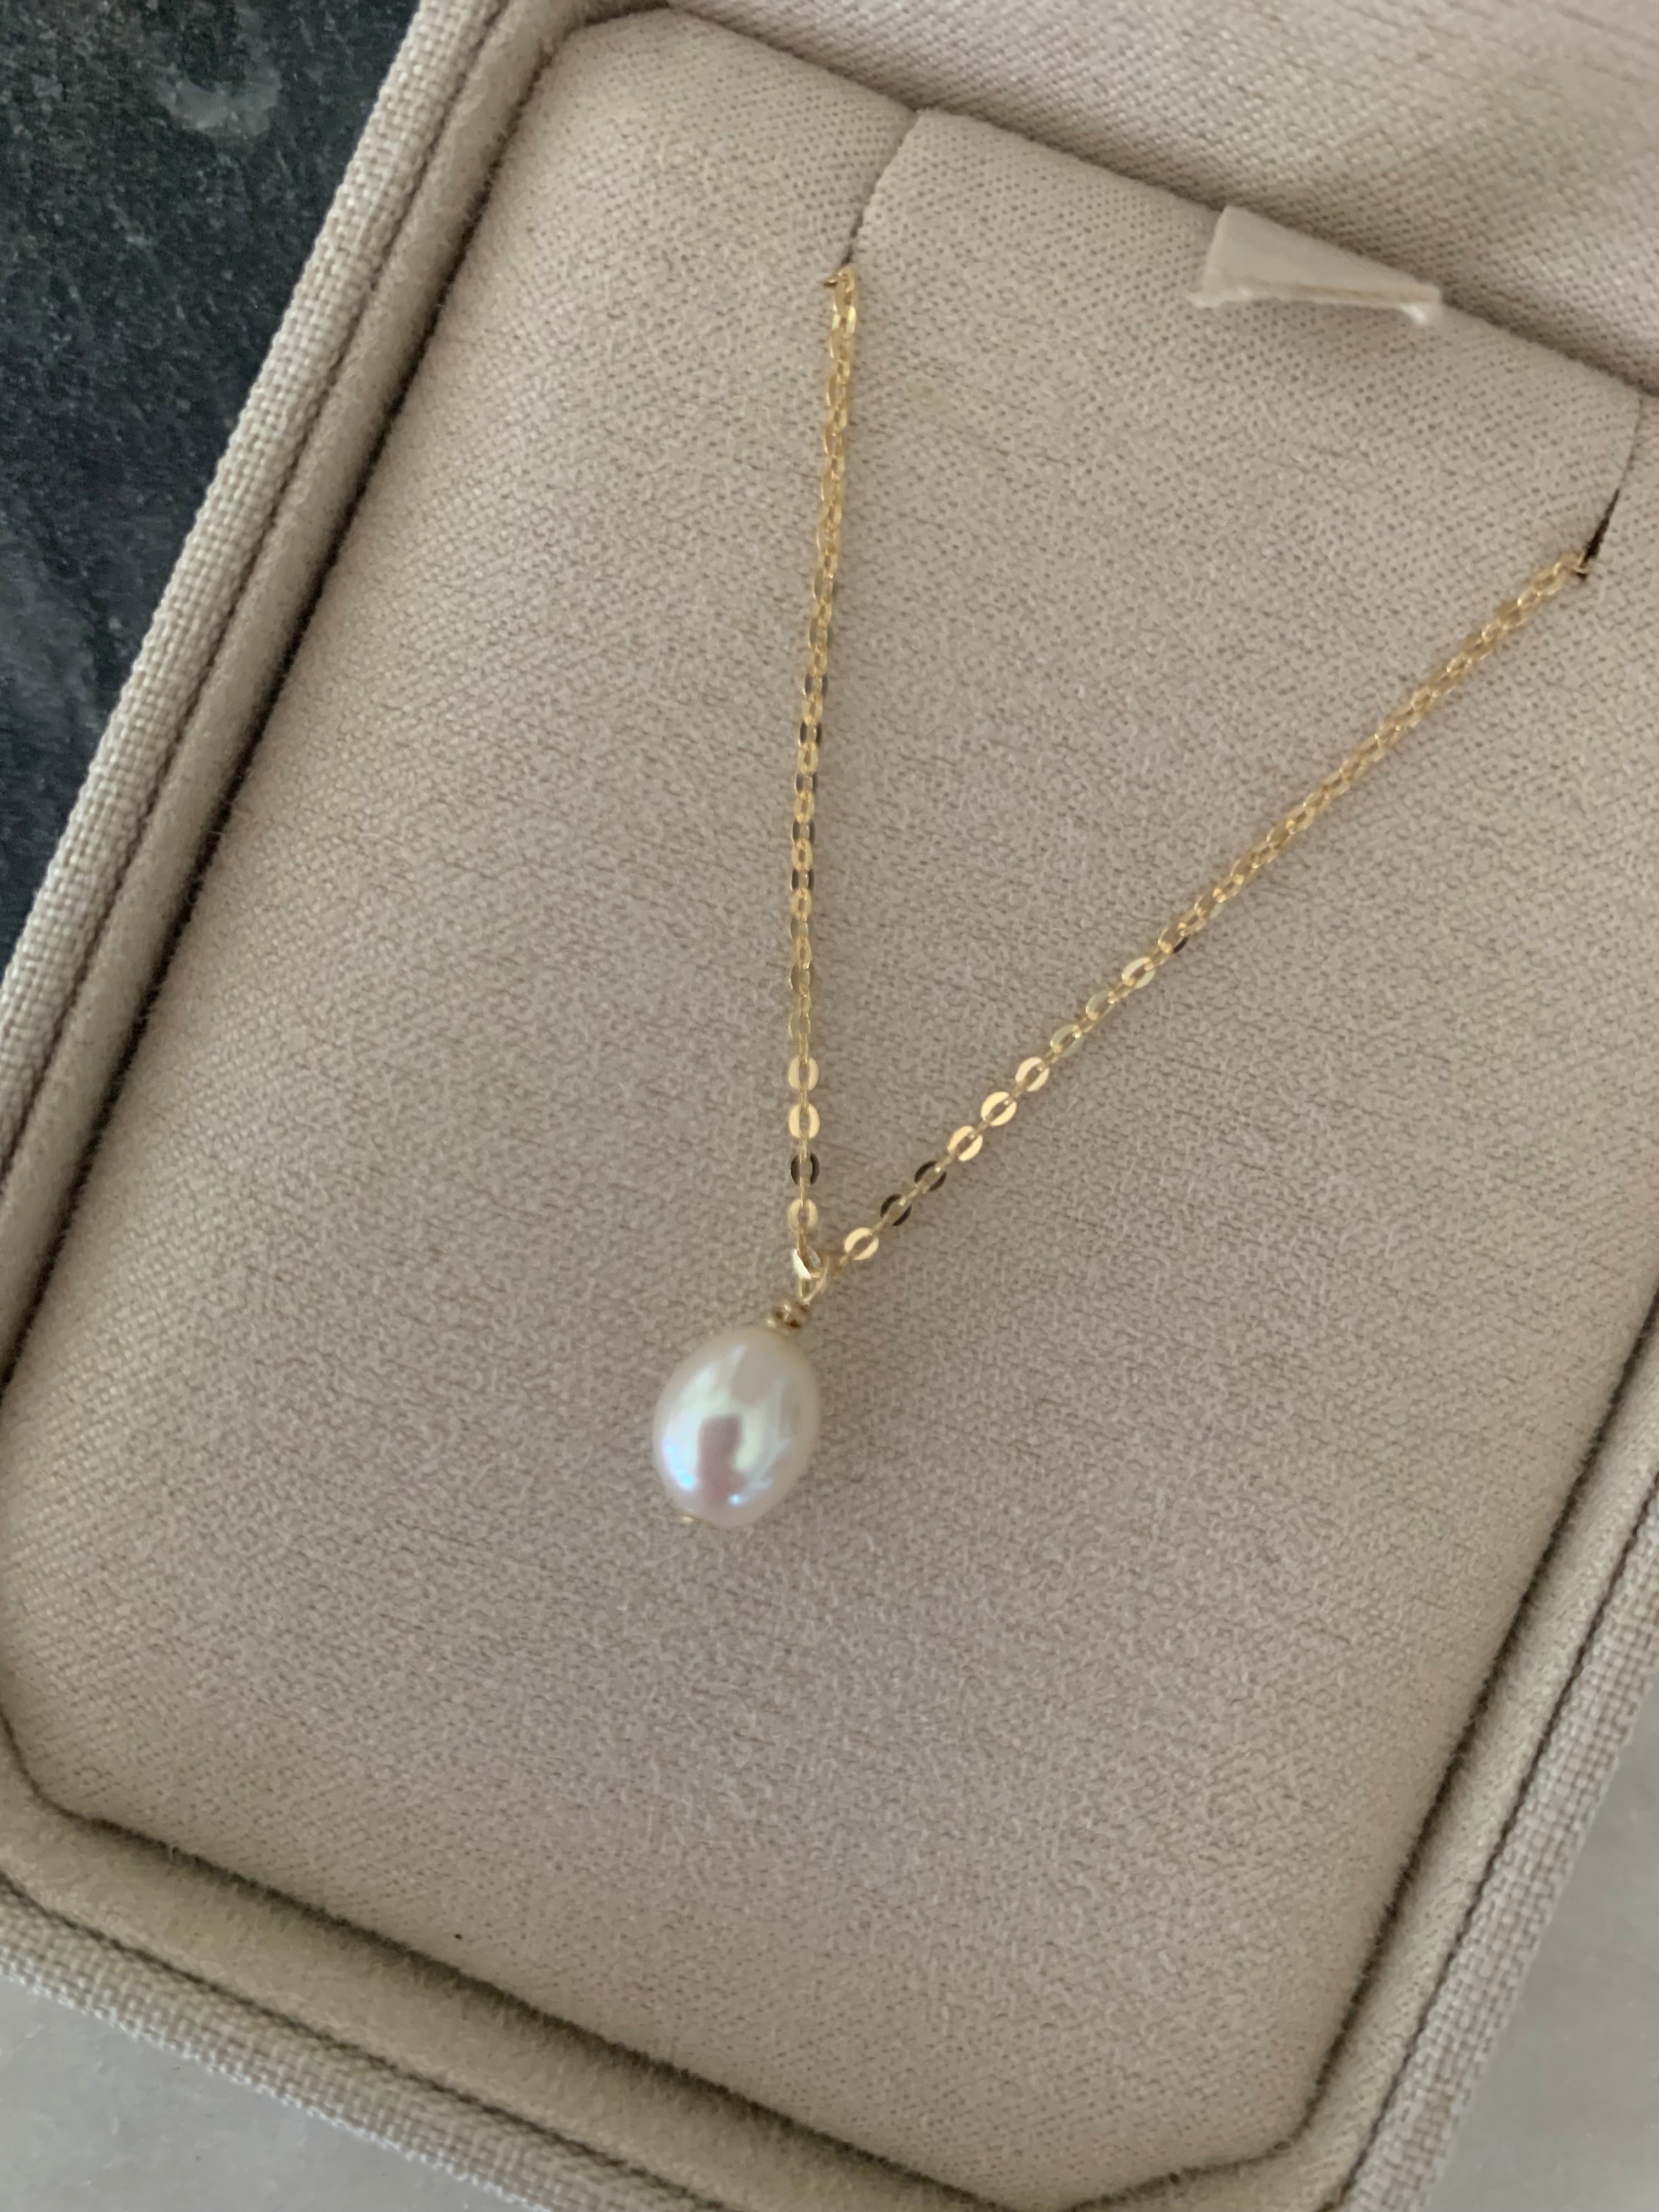 10k yellow gold pearl necklace